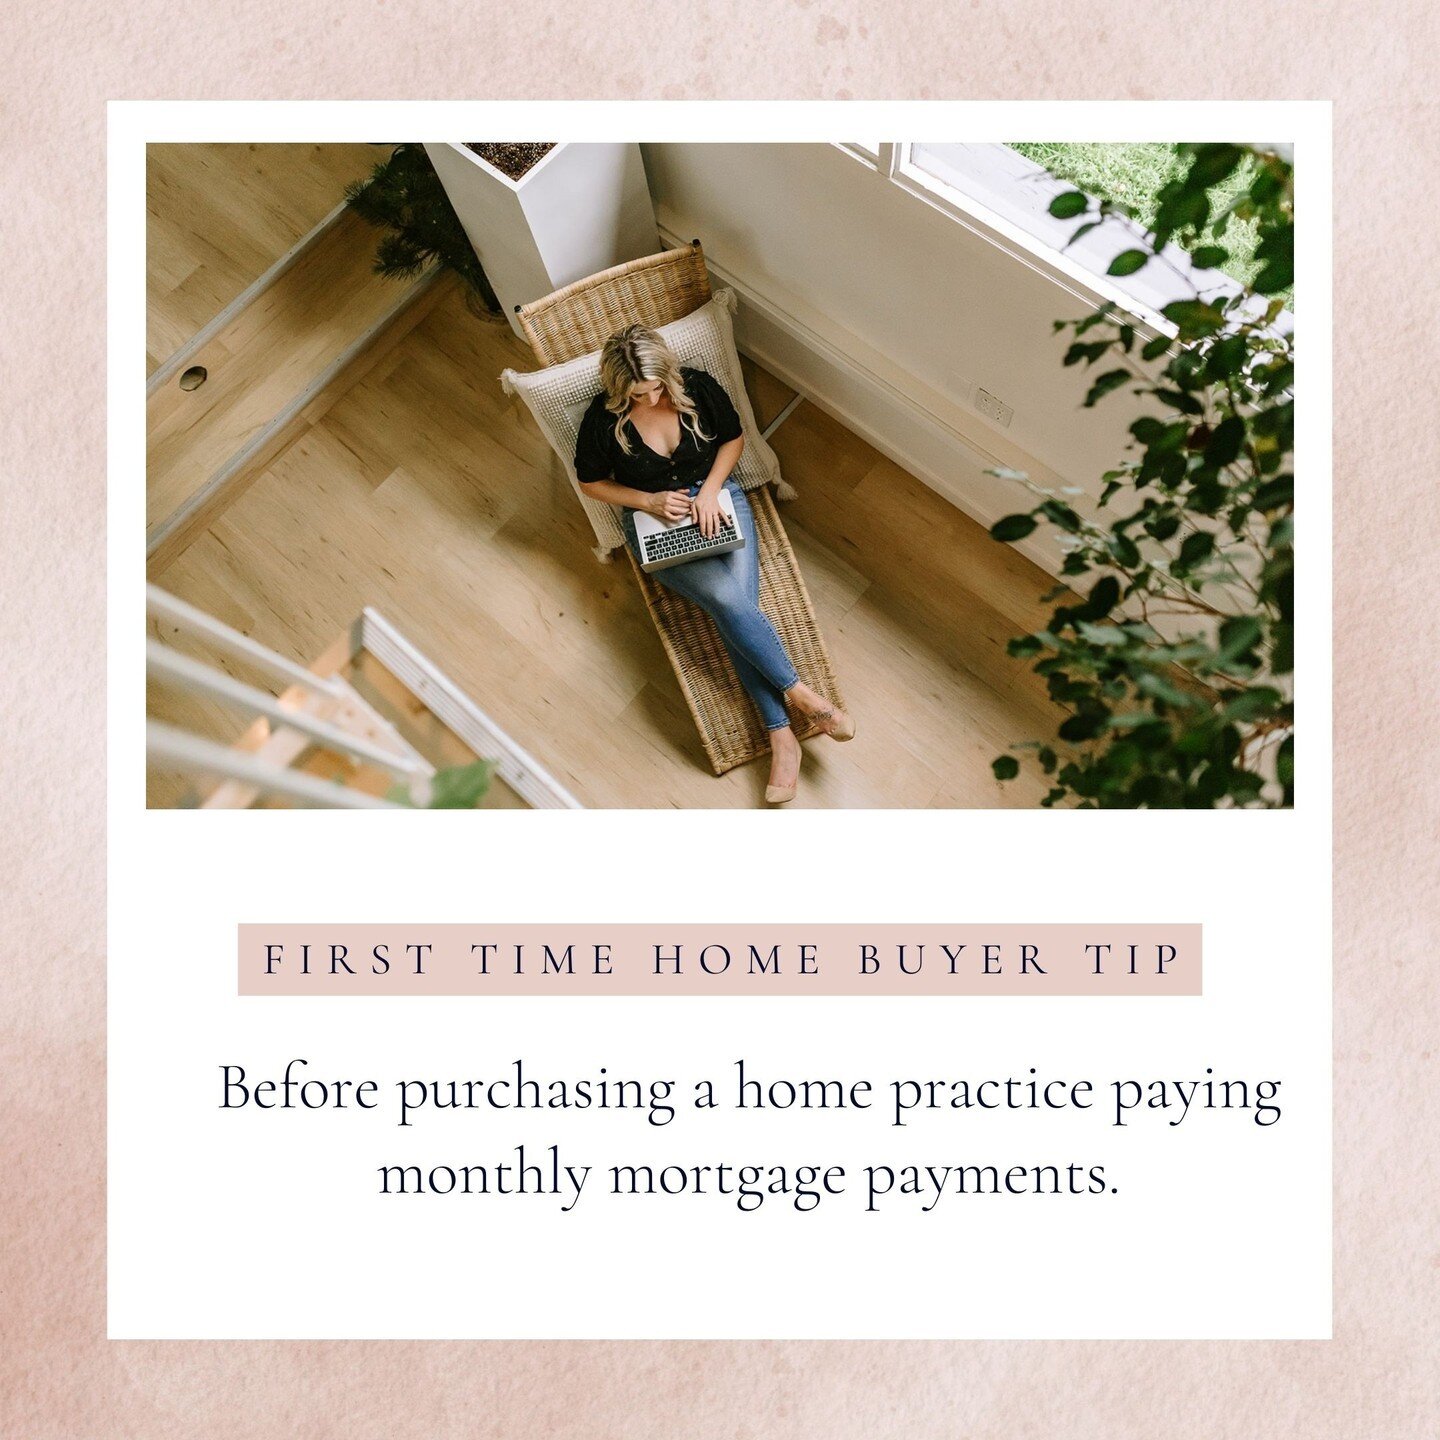 Home Buyer Tip! Practice makes perfect am I right? ⁠
⁠
So before purchasing a home practice paying a monthly mortgage before you buy! This will help you navigate how much you can actually afford and help you get used to this payment coming out of you